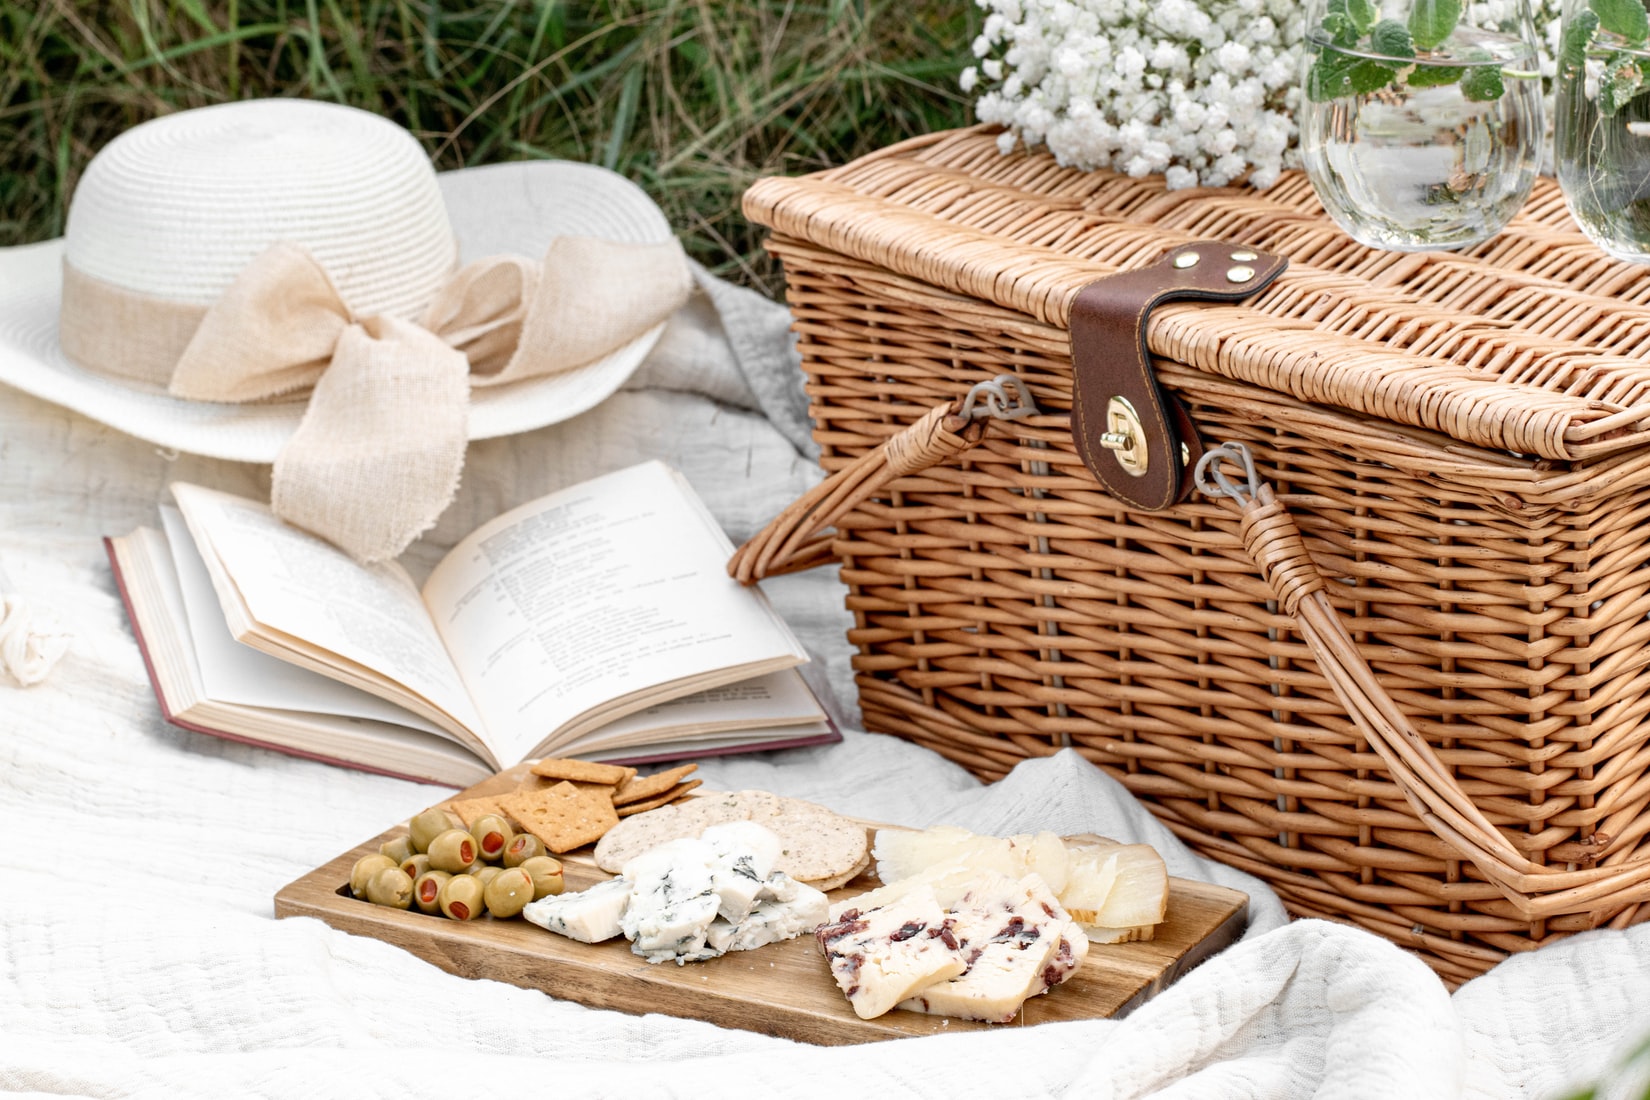 Where to Find the Best Picnic Spots in Los Angeles